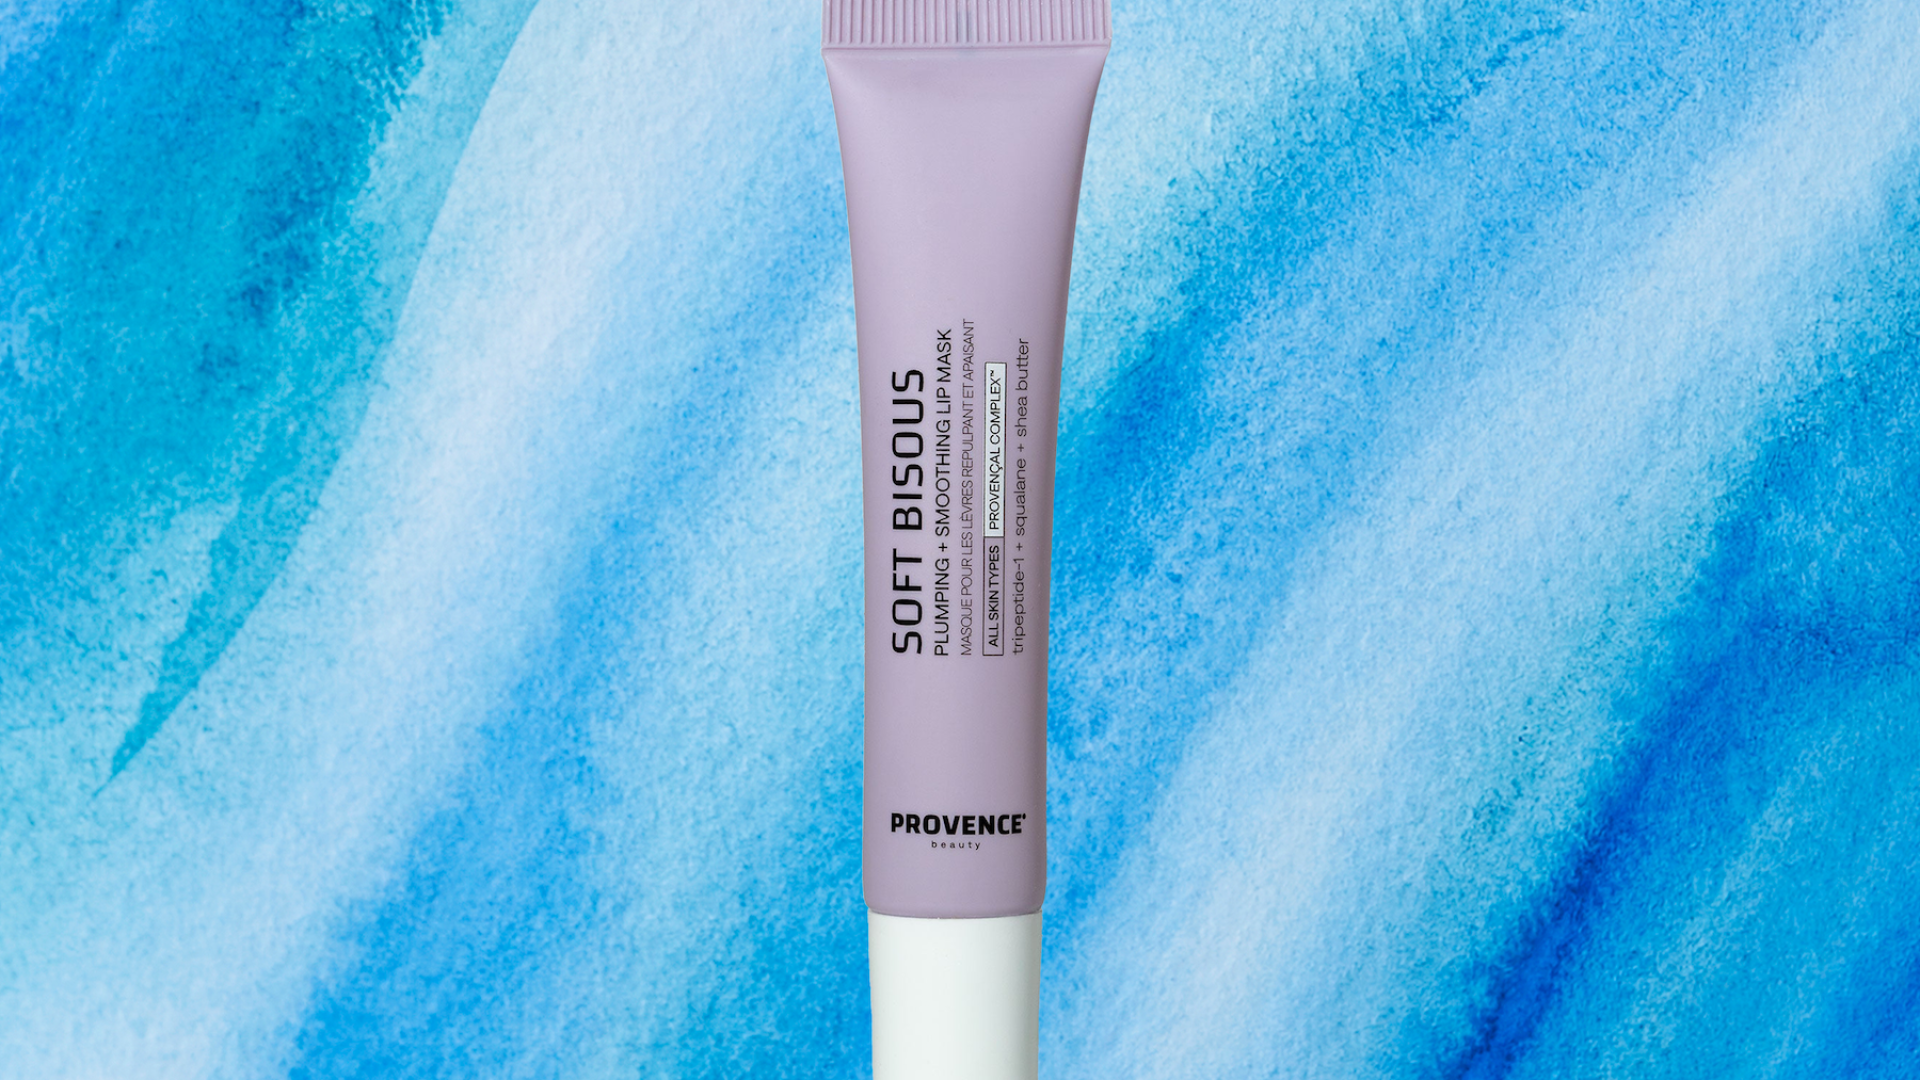 Product of the Week: PROVENCE Beauty Lip Mask